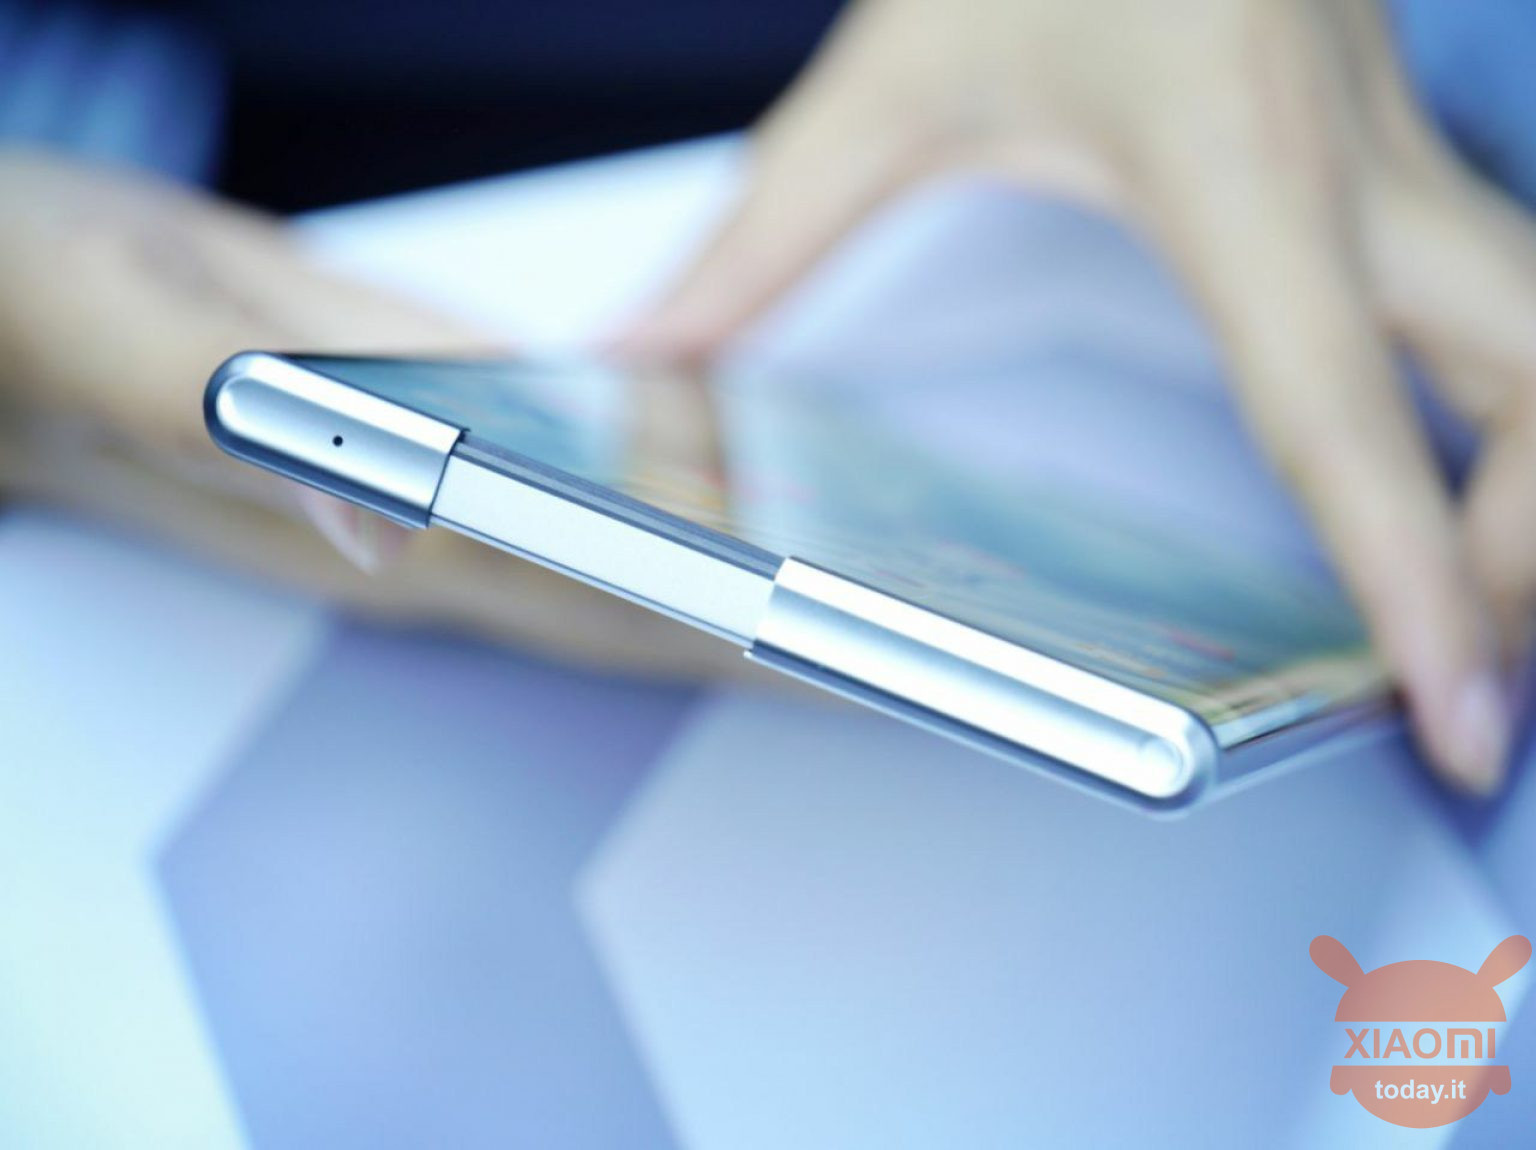 xiaomi extendable and retractable smartphone